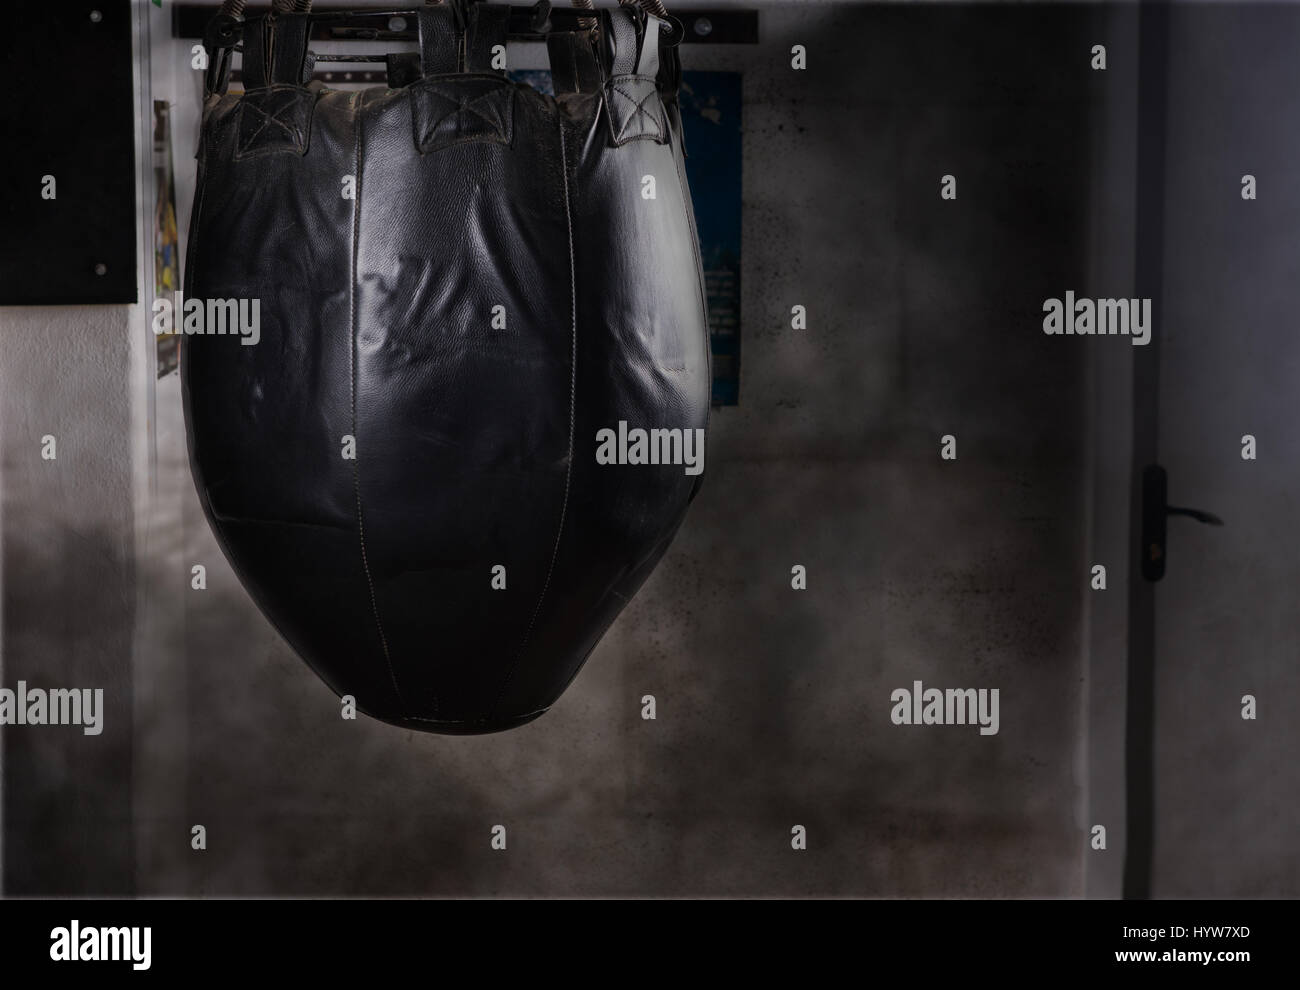 Hanging Boxing Gloves Wallpaper 56 pictures